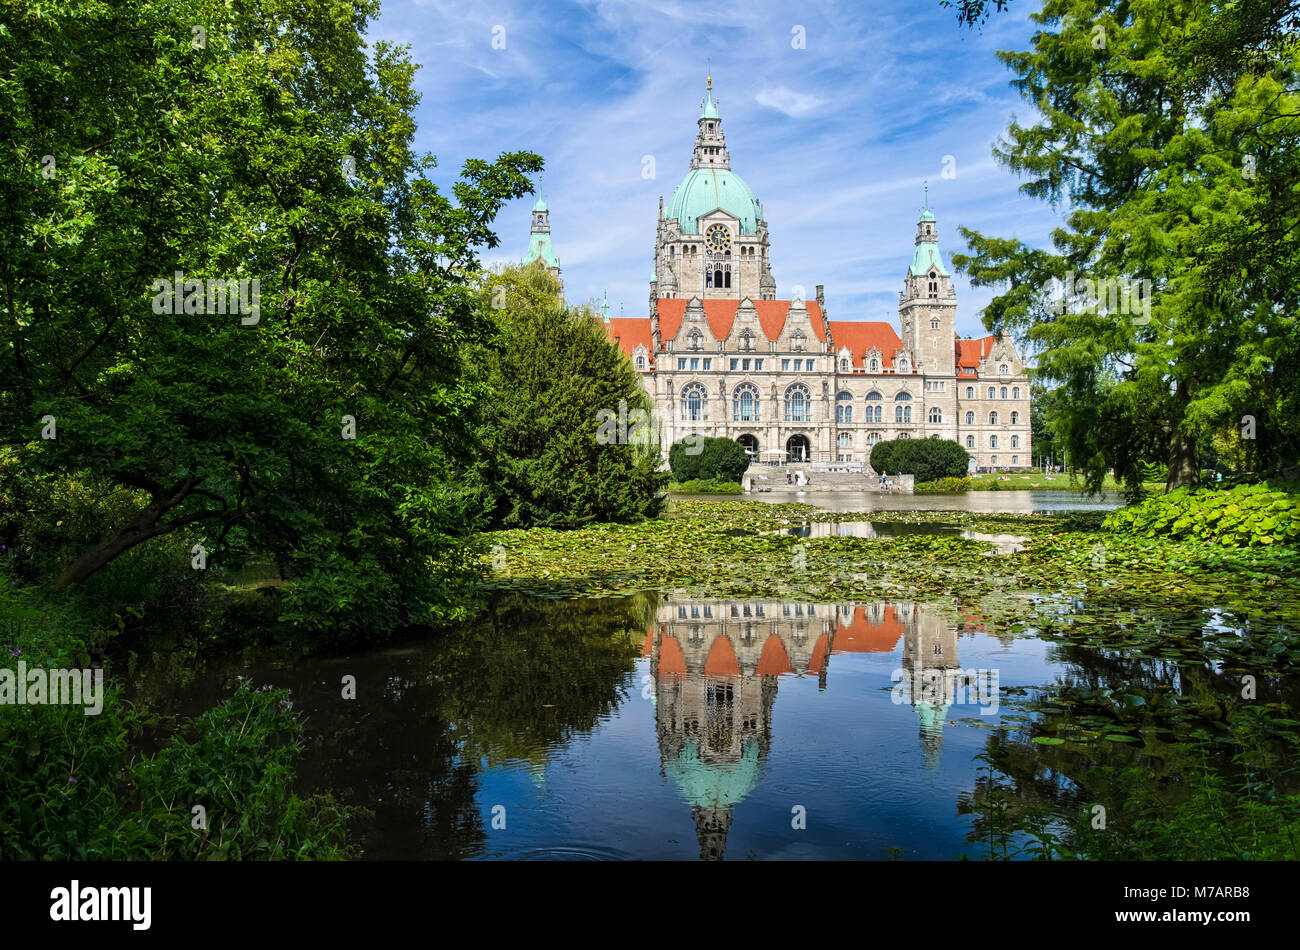 City Hall of Hannover, Germany in summer with reflection in a lake Stock Photo